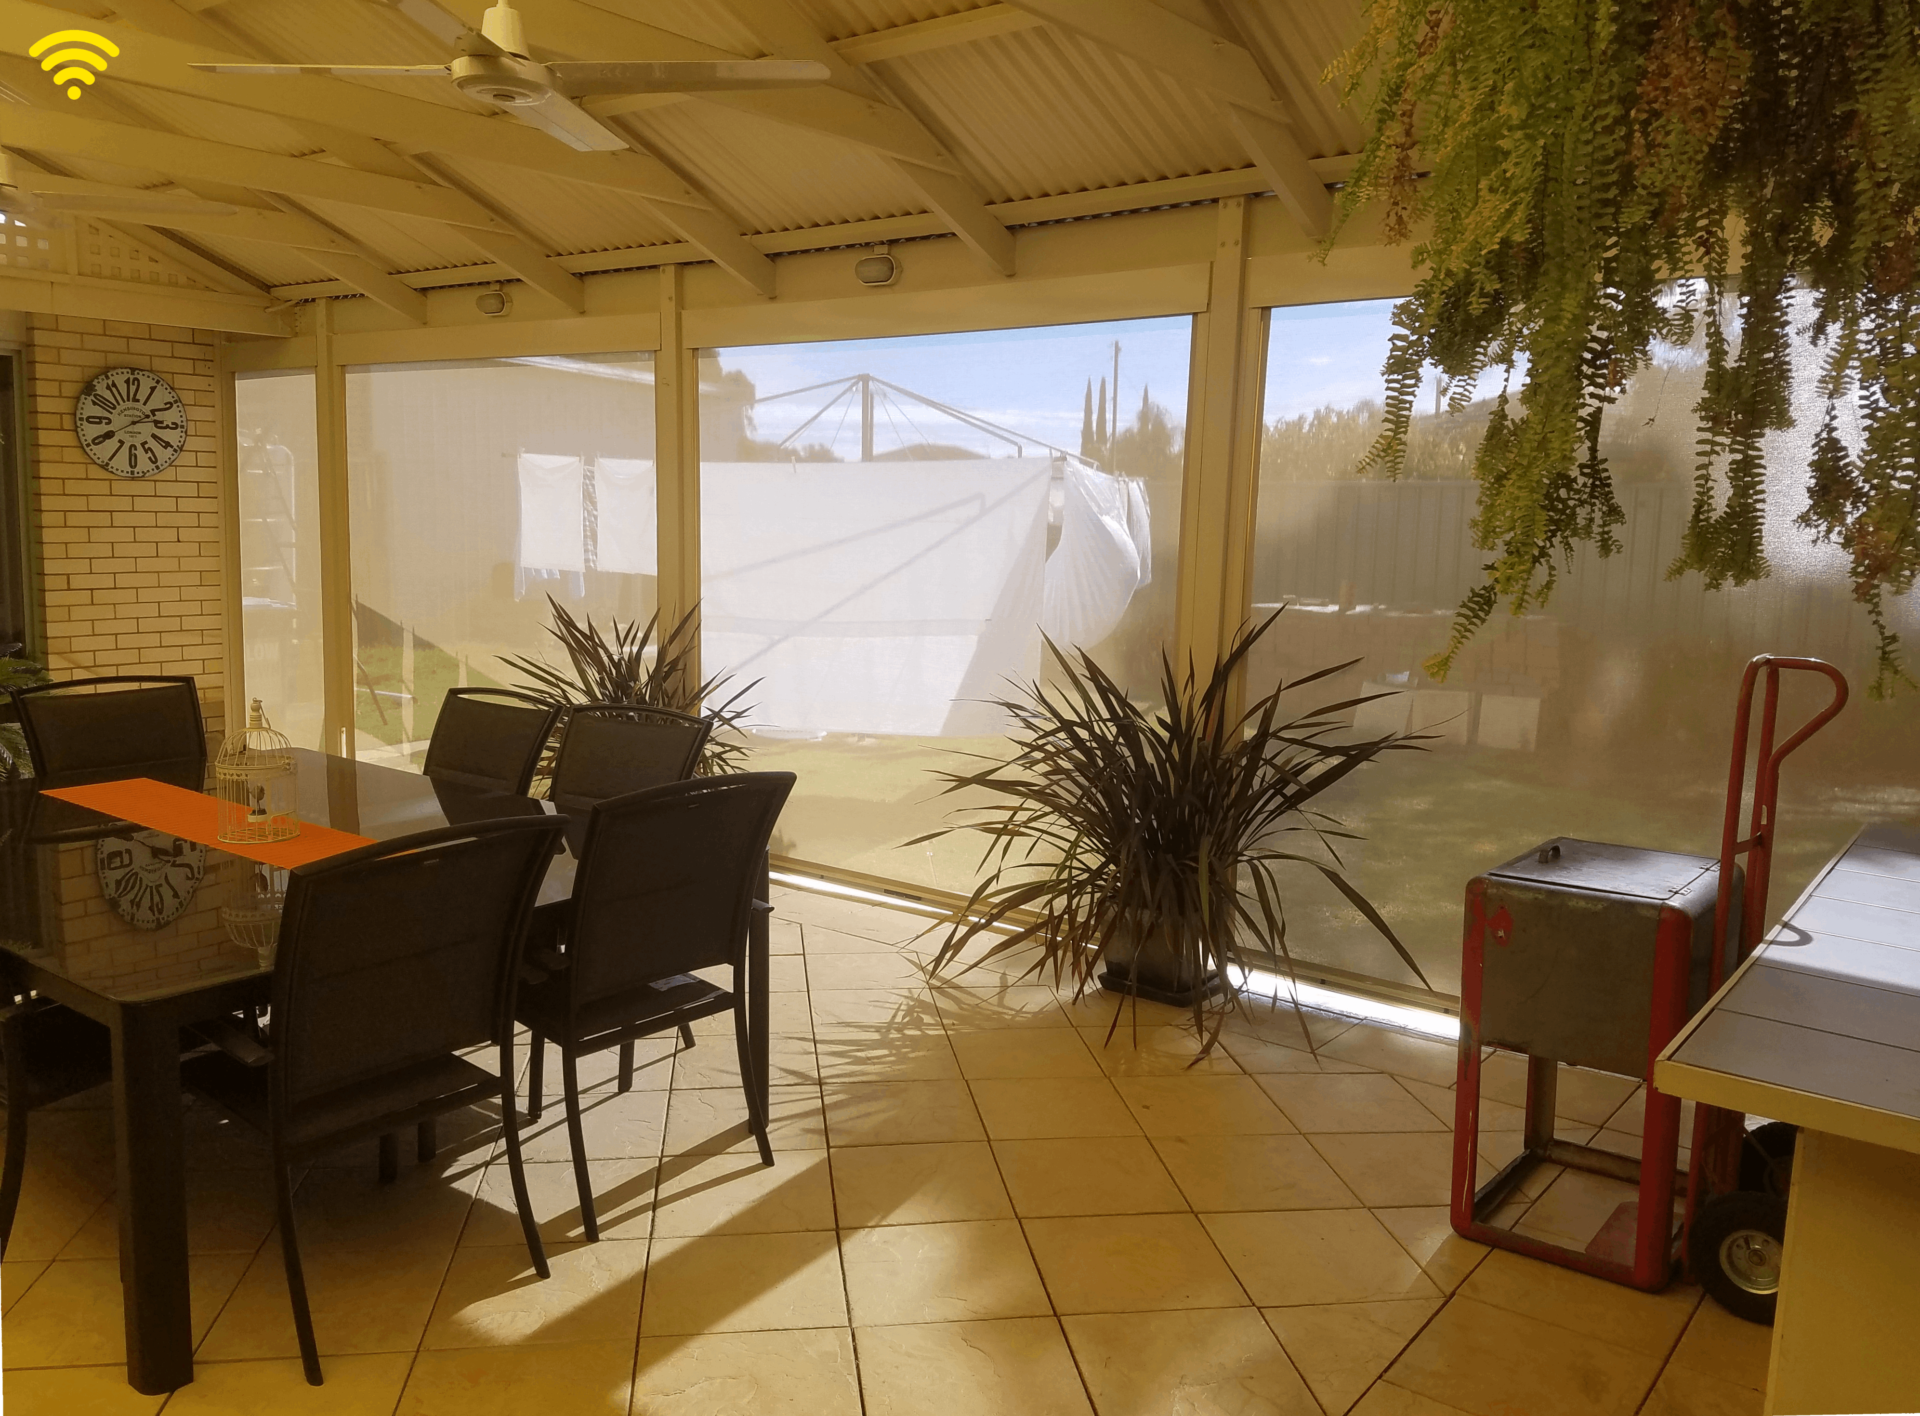 outdoor blinds stop harsh sunlight from entering your outdoor entertaining space